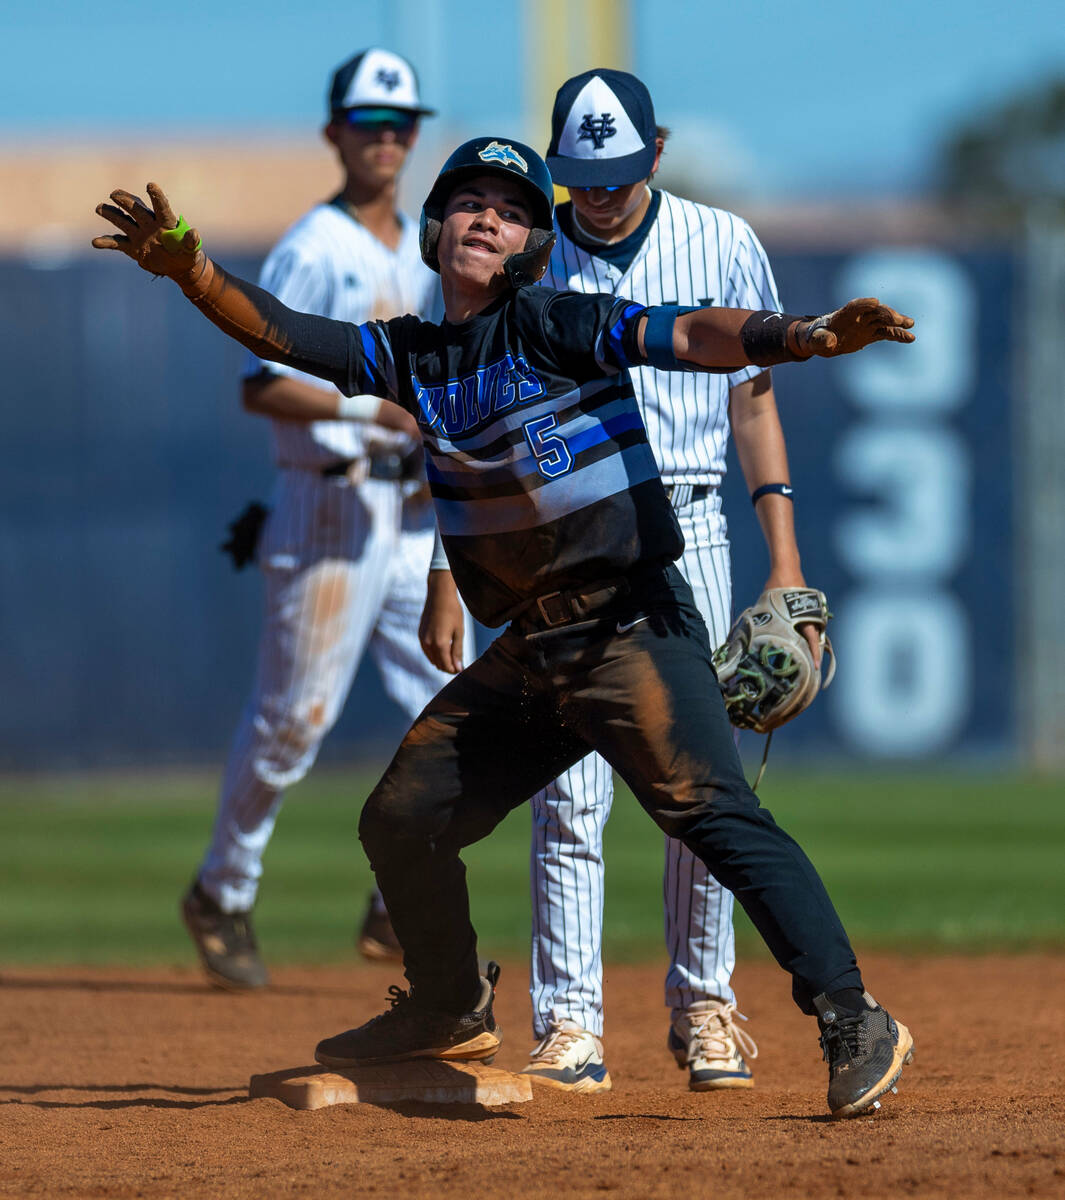 Basic runner Lyndon Lee celebrates his double arriving at second base before Spring Valley infi ...